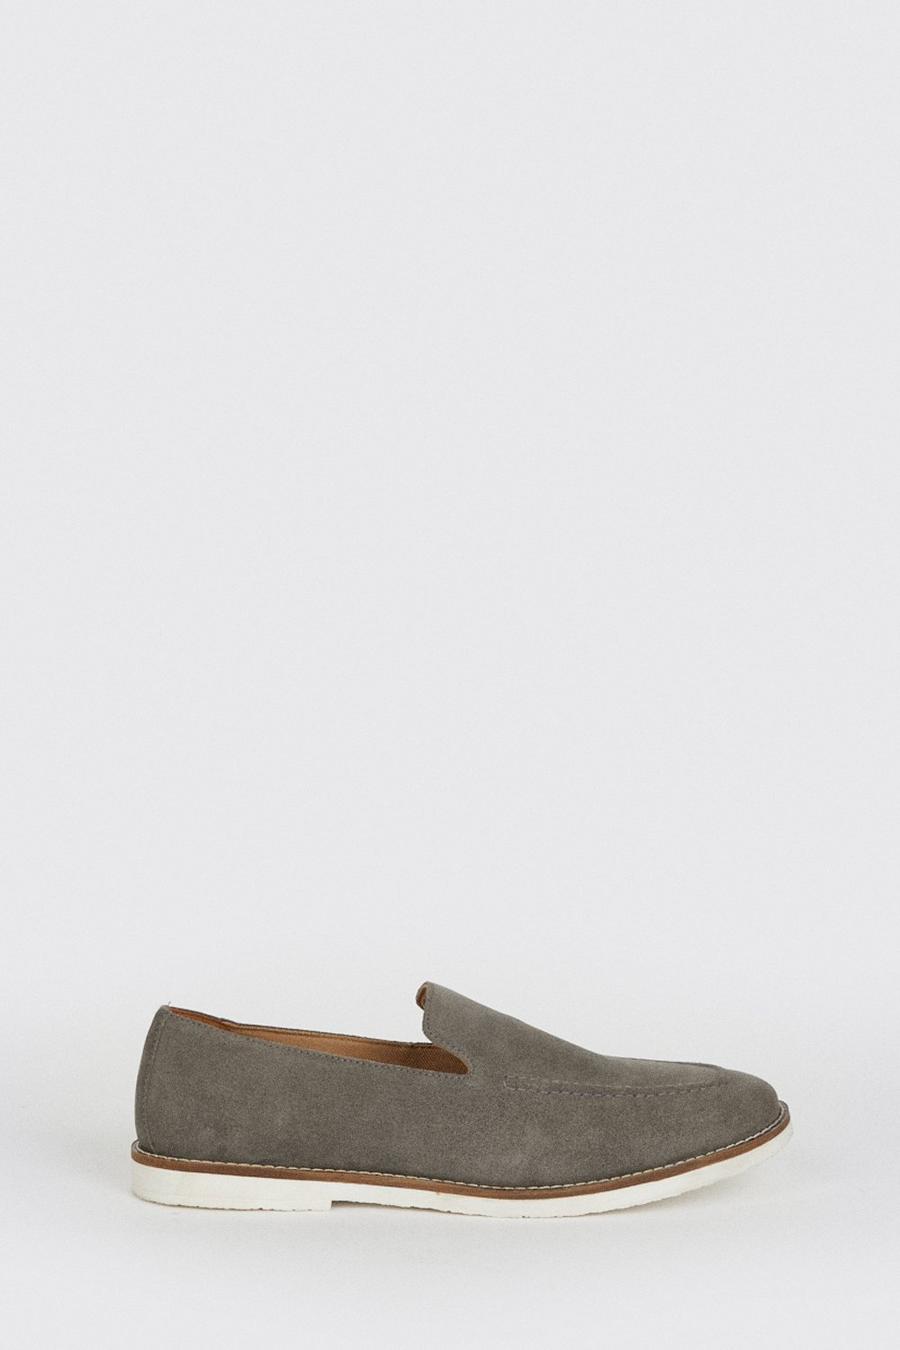 Grey Suede Slip On Loafers